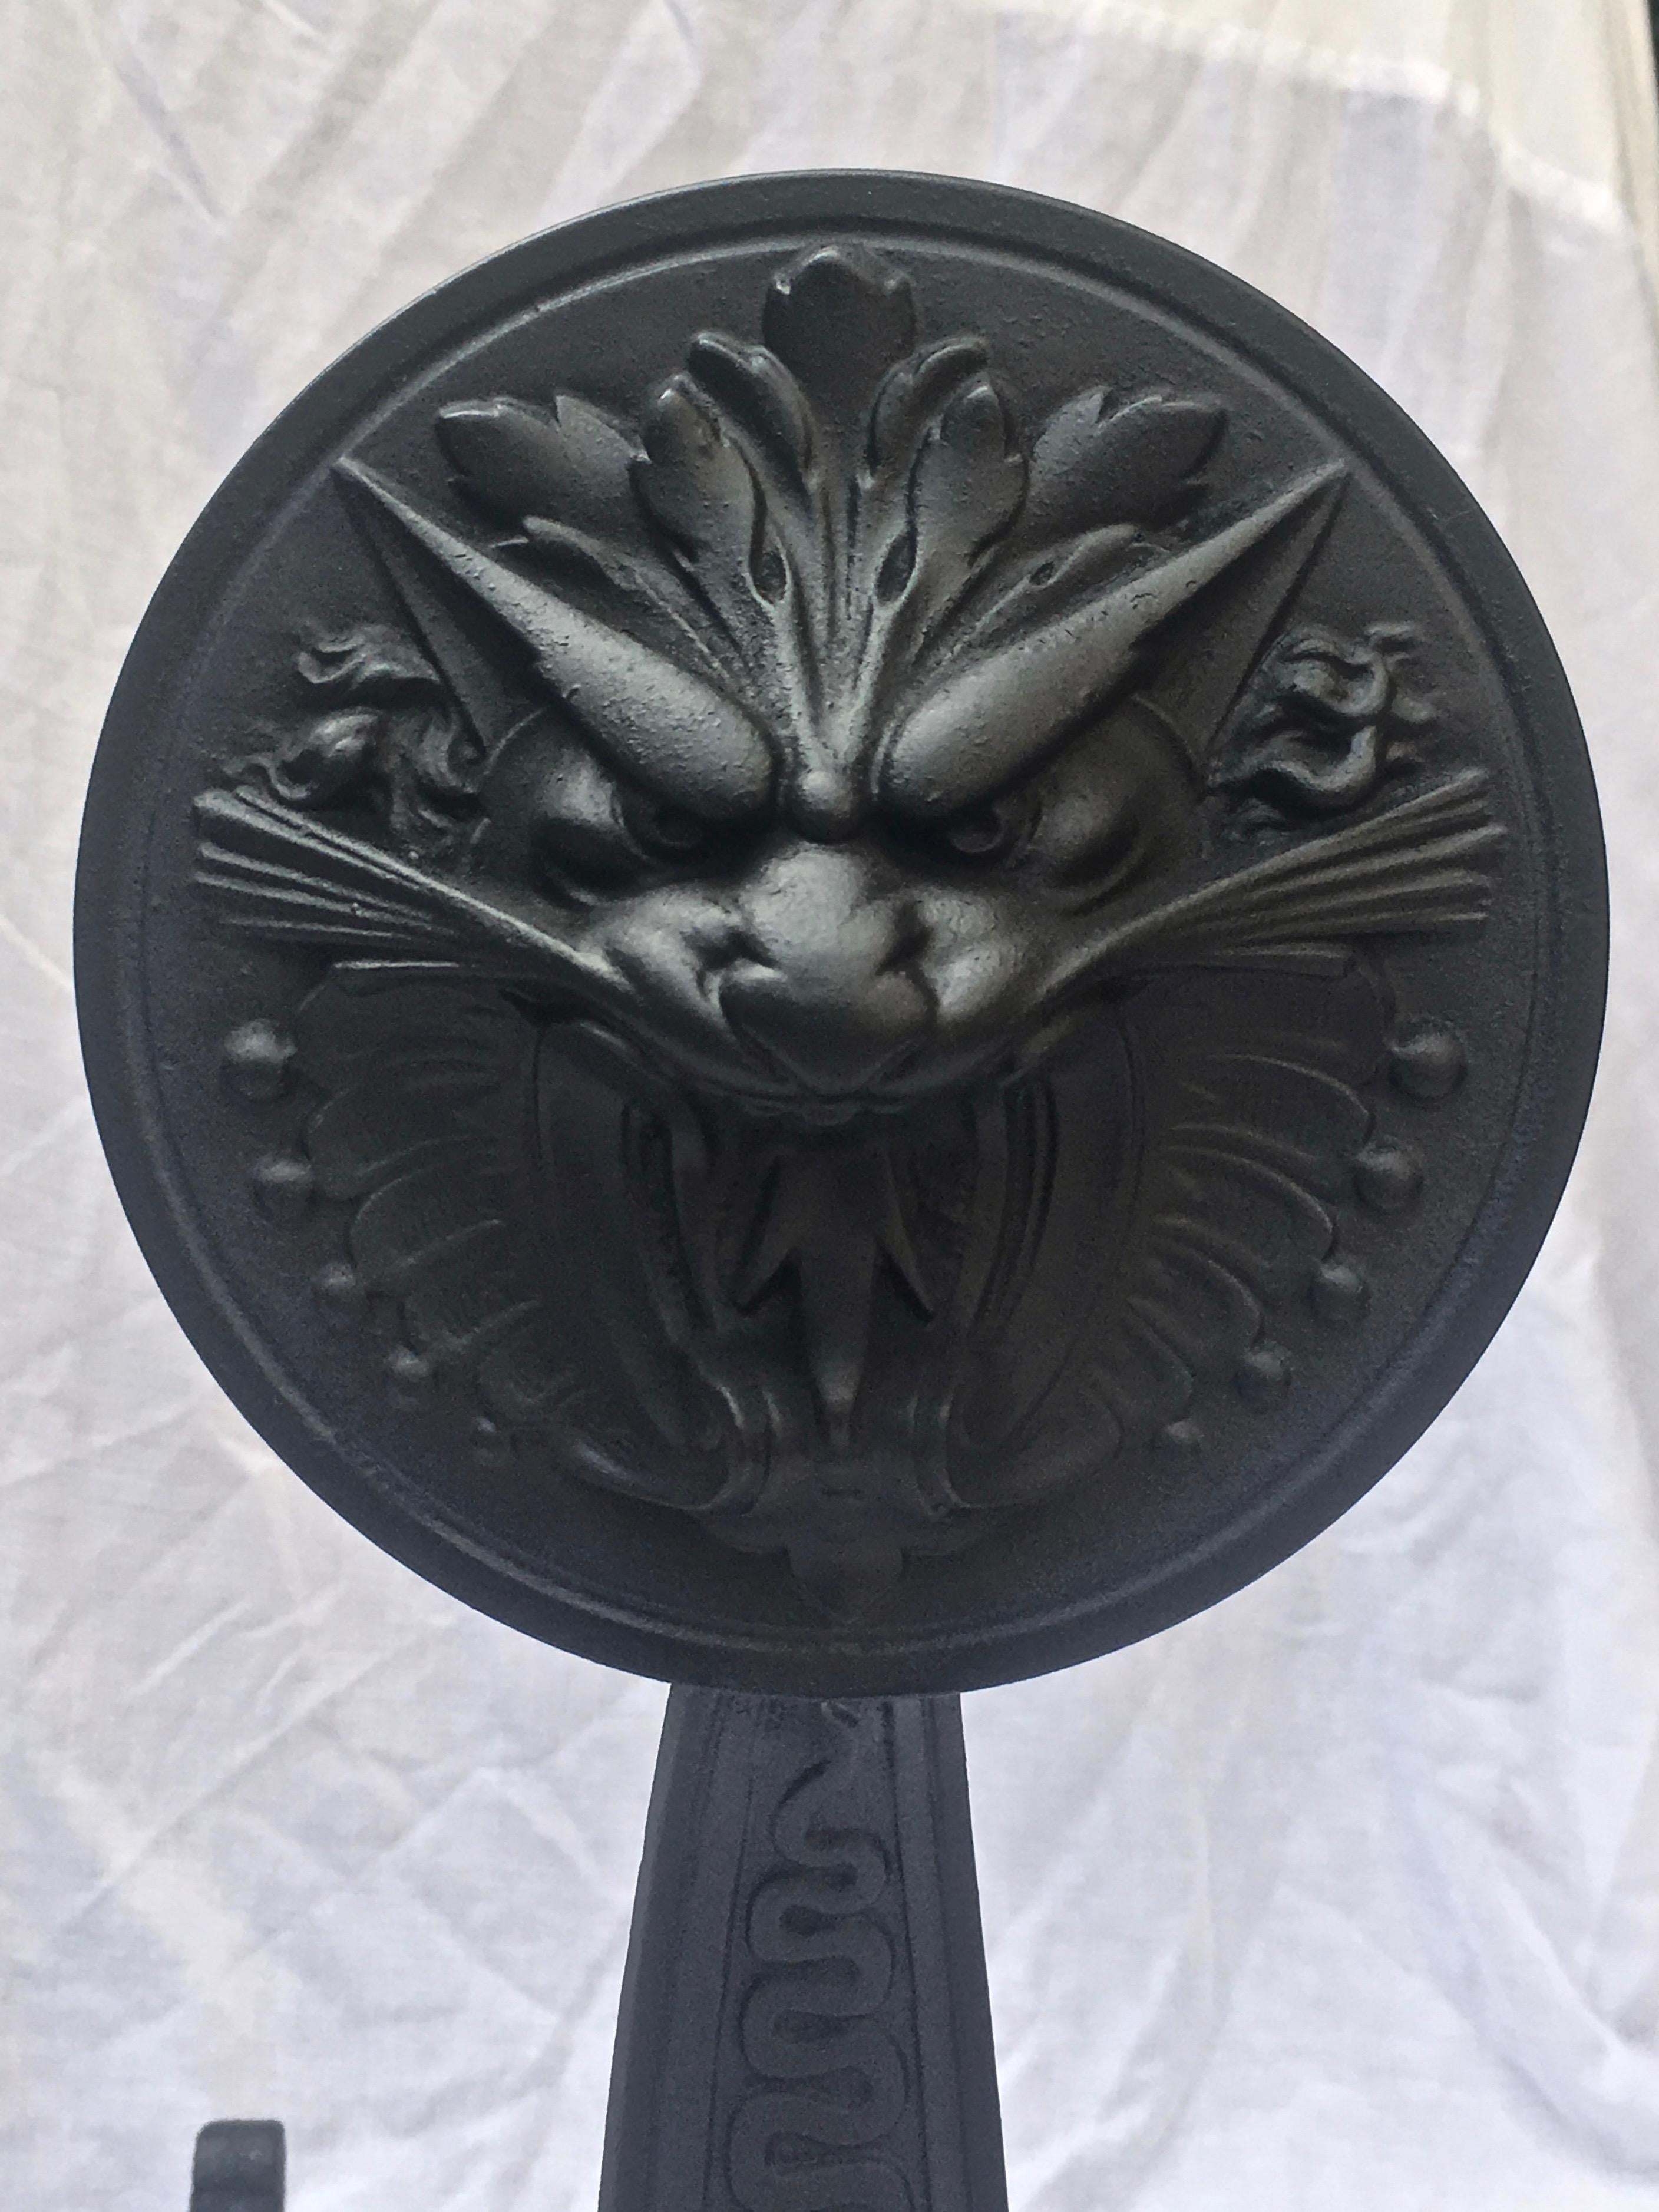 Pair of Andirons are made of cast wrought iron depicting the face of a roaring gargoyle with a, serpentine, detailed body. The stamp of B &H is on the back side along with the original Patin date of 1886.